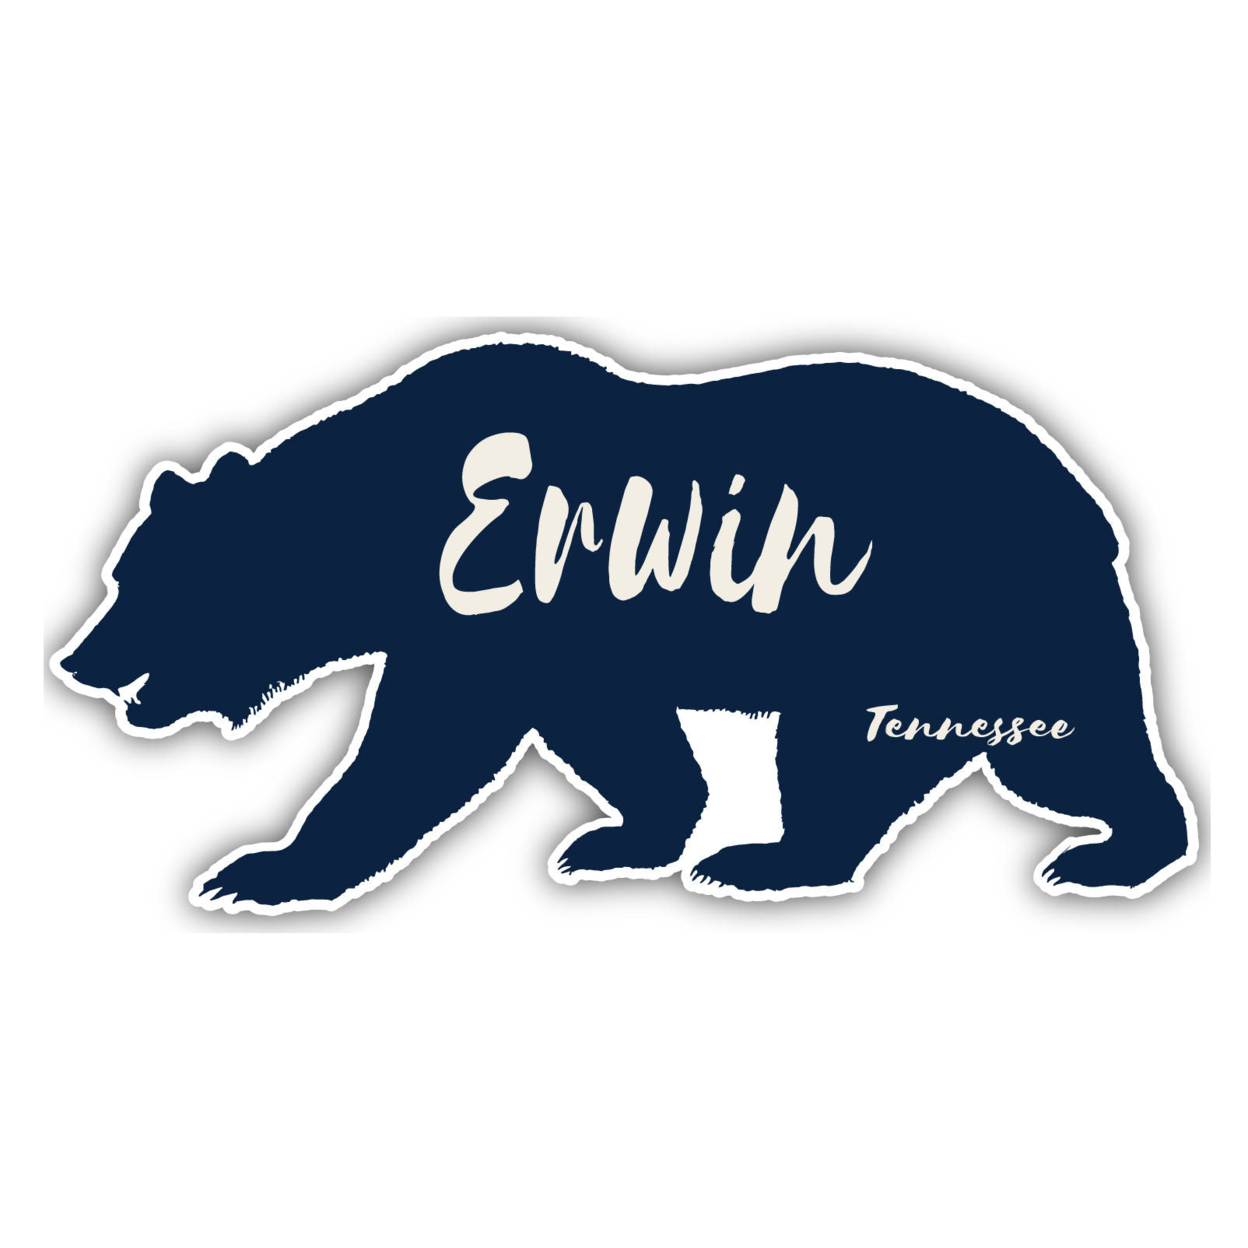 Erwin Tennessee Souvenir Decorative Stickers (Choose Theme And Size) - 4-Pack, 6-Inch, Bear